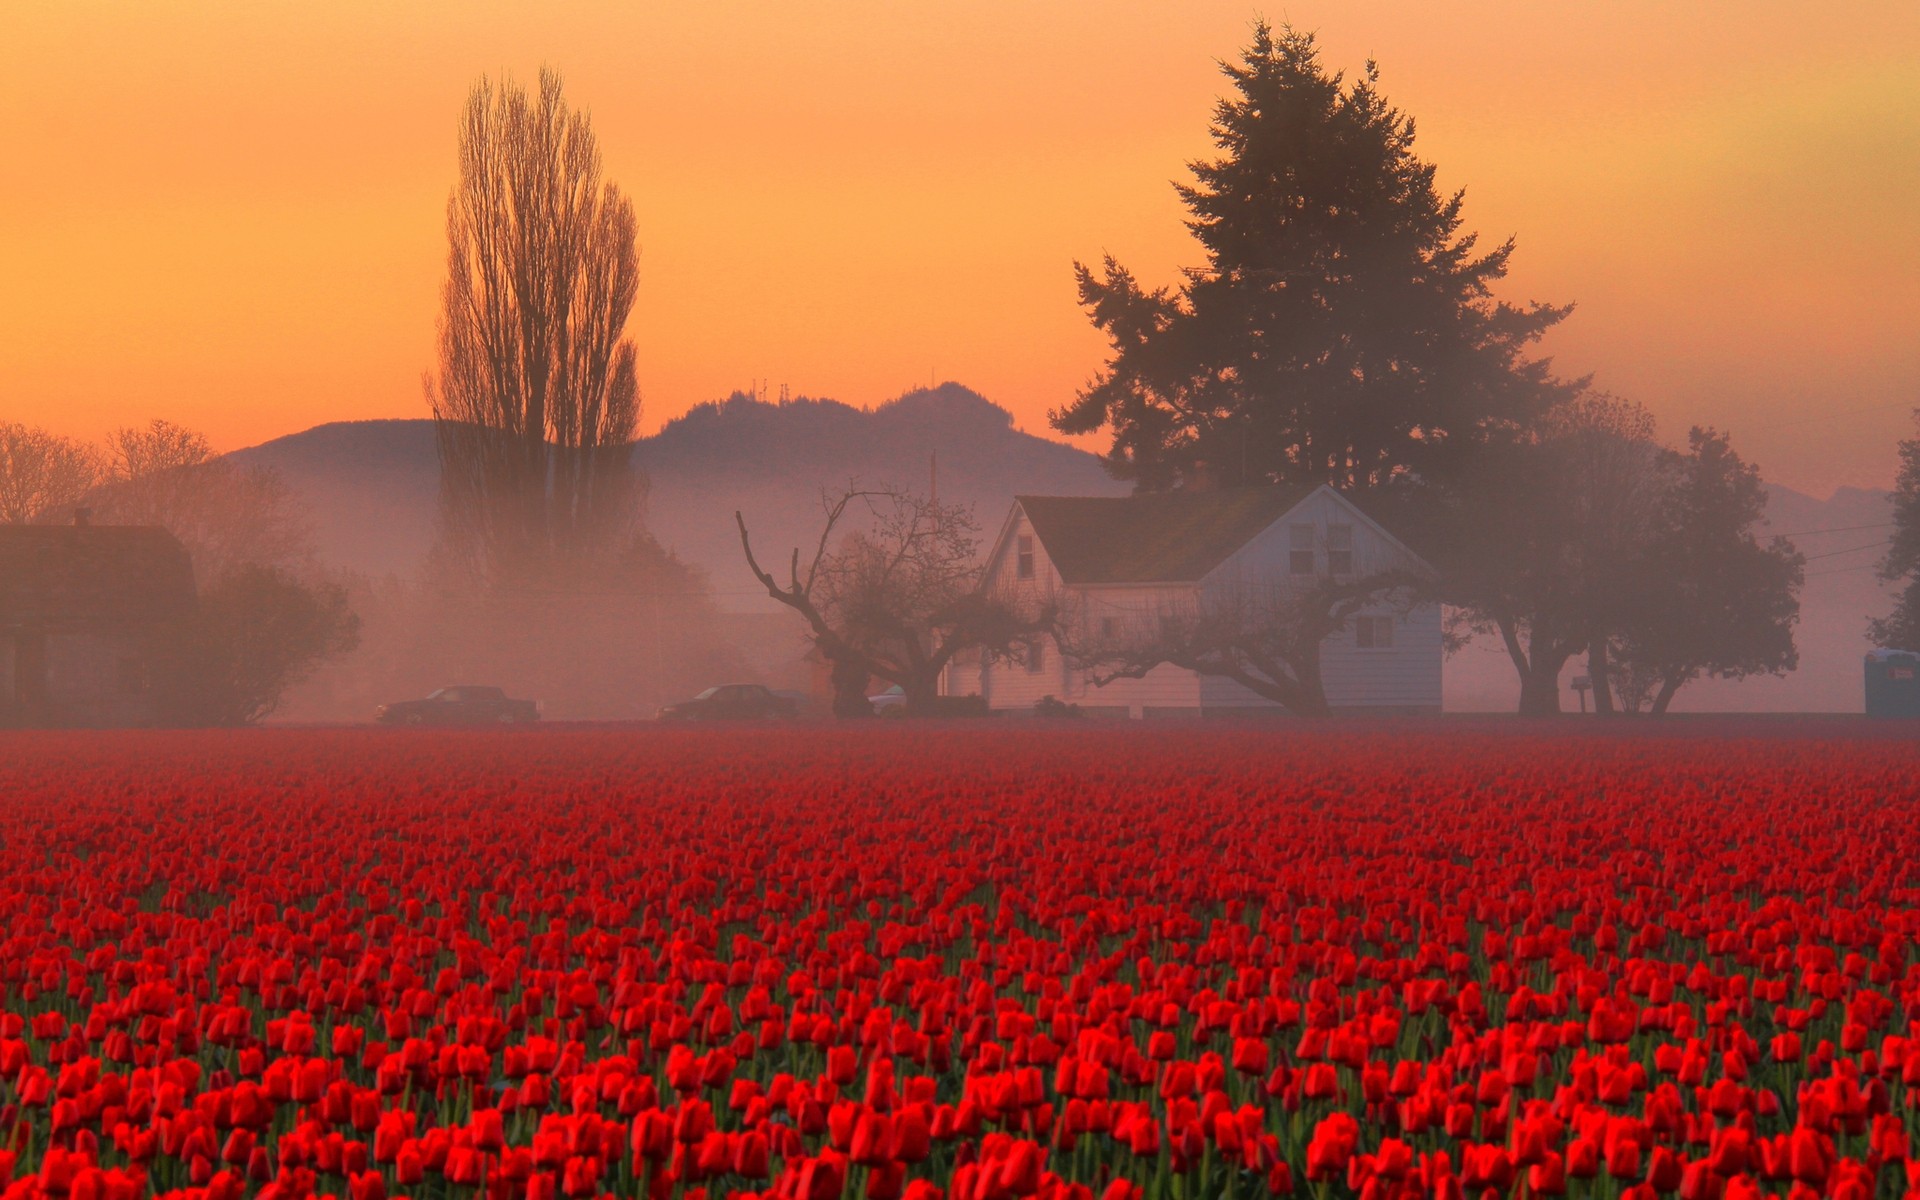 flowers landscape agriculture flower field poppy sunset farm dawn outdoors cropland tree country nature tulips red tulips house mountains